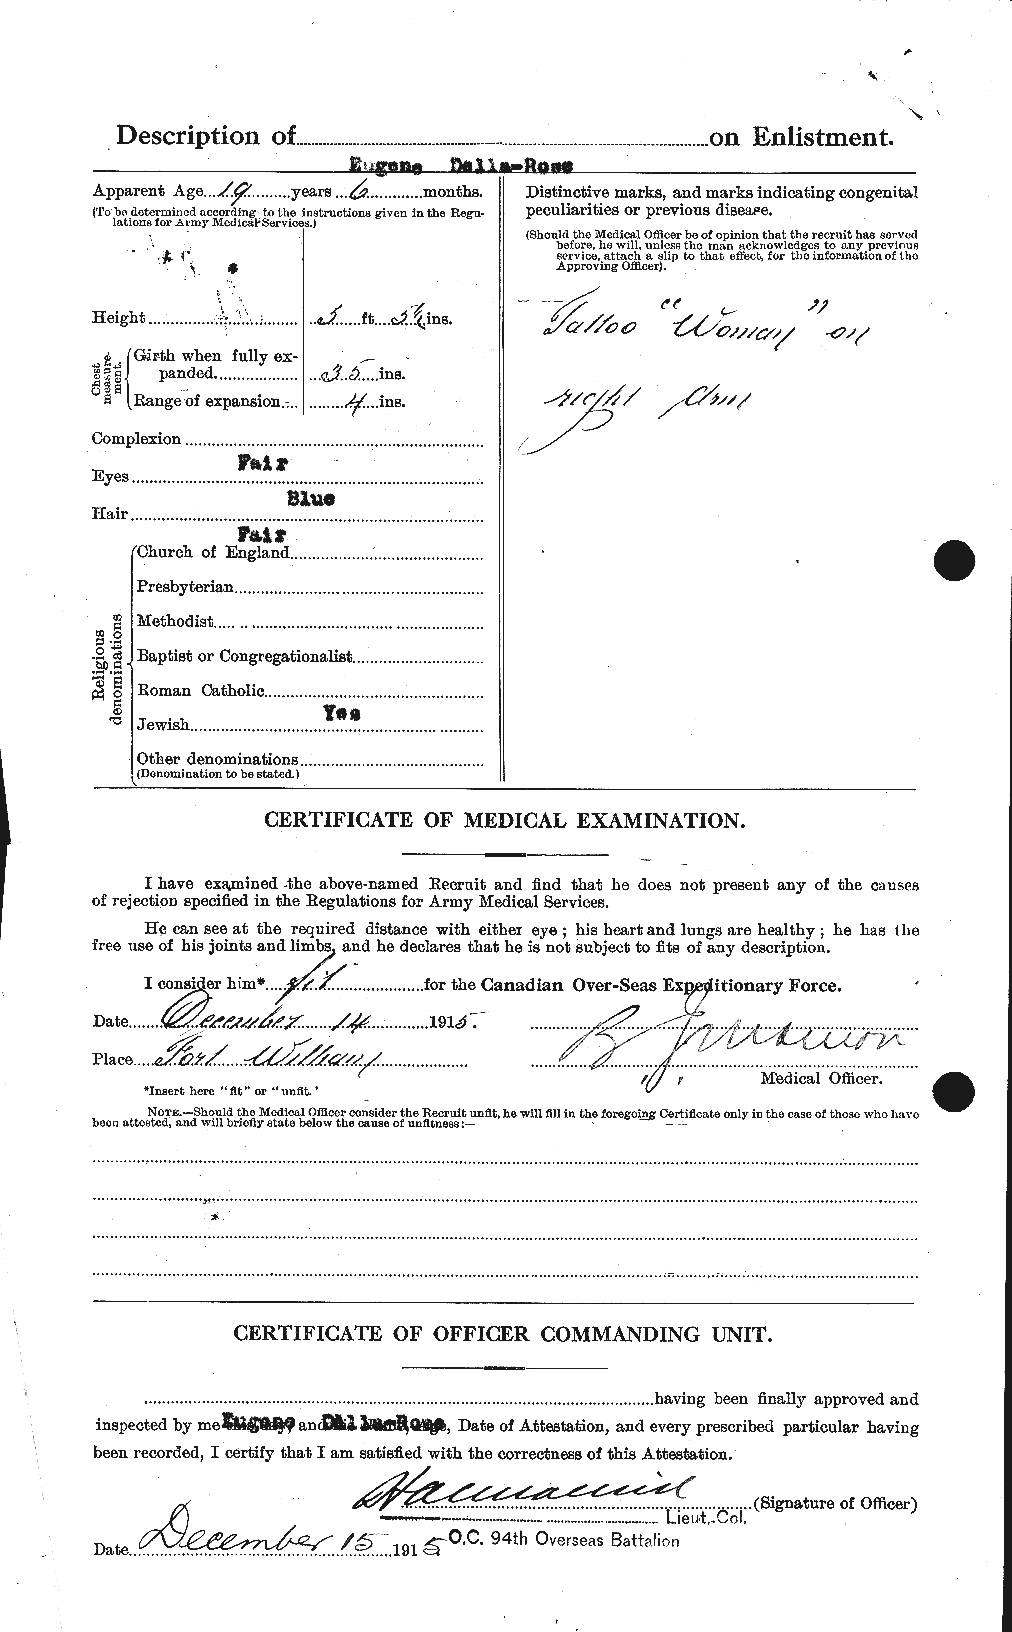 Personnel Records of the First World War - CEF 287072b